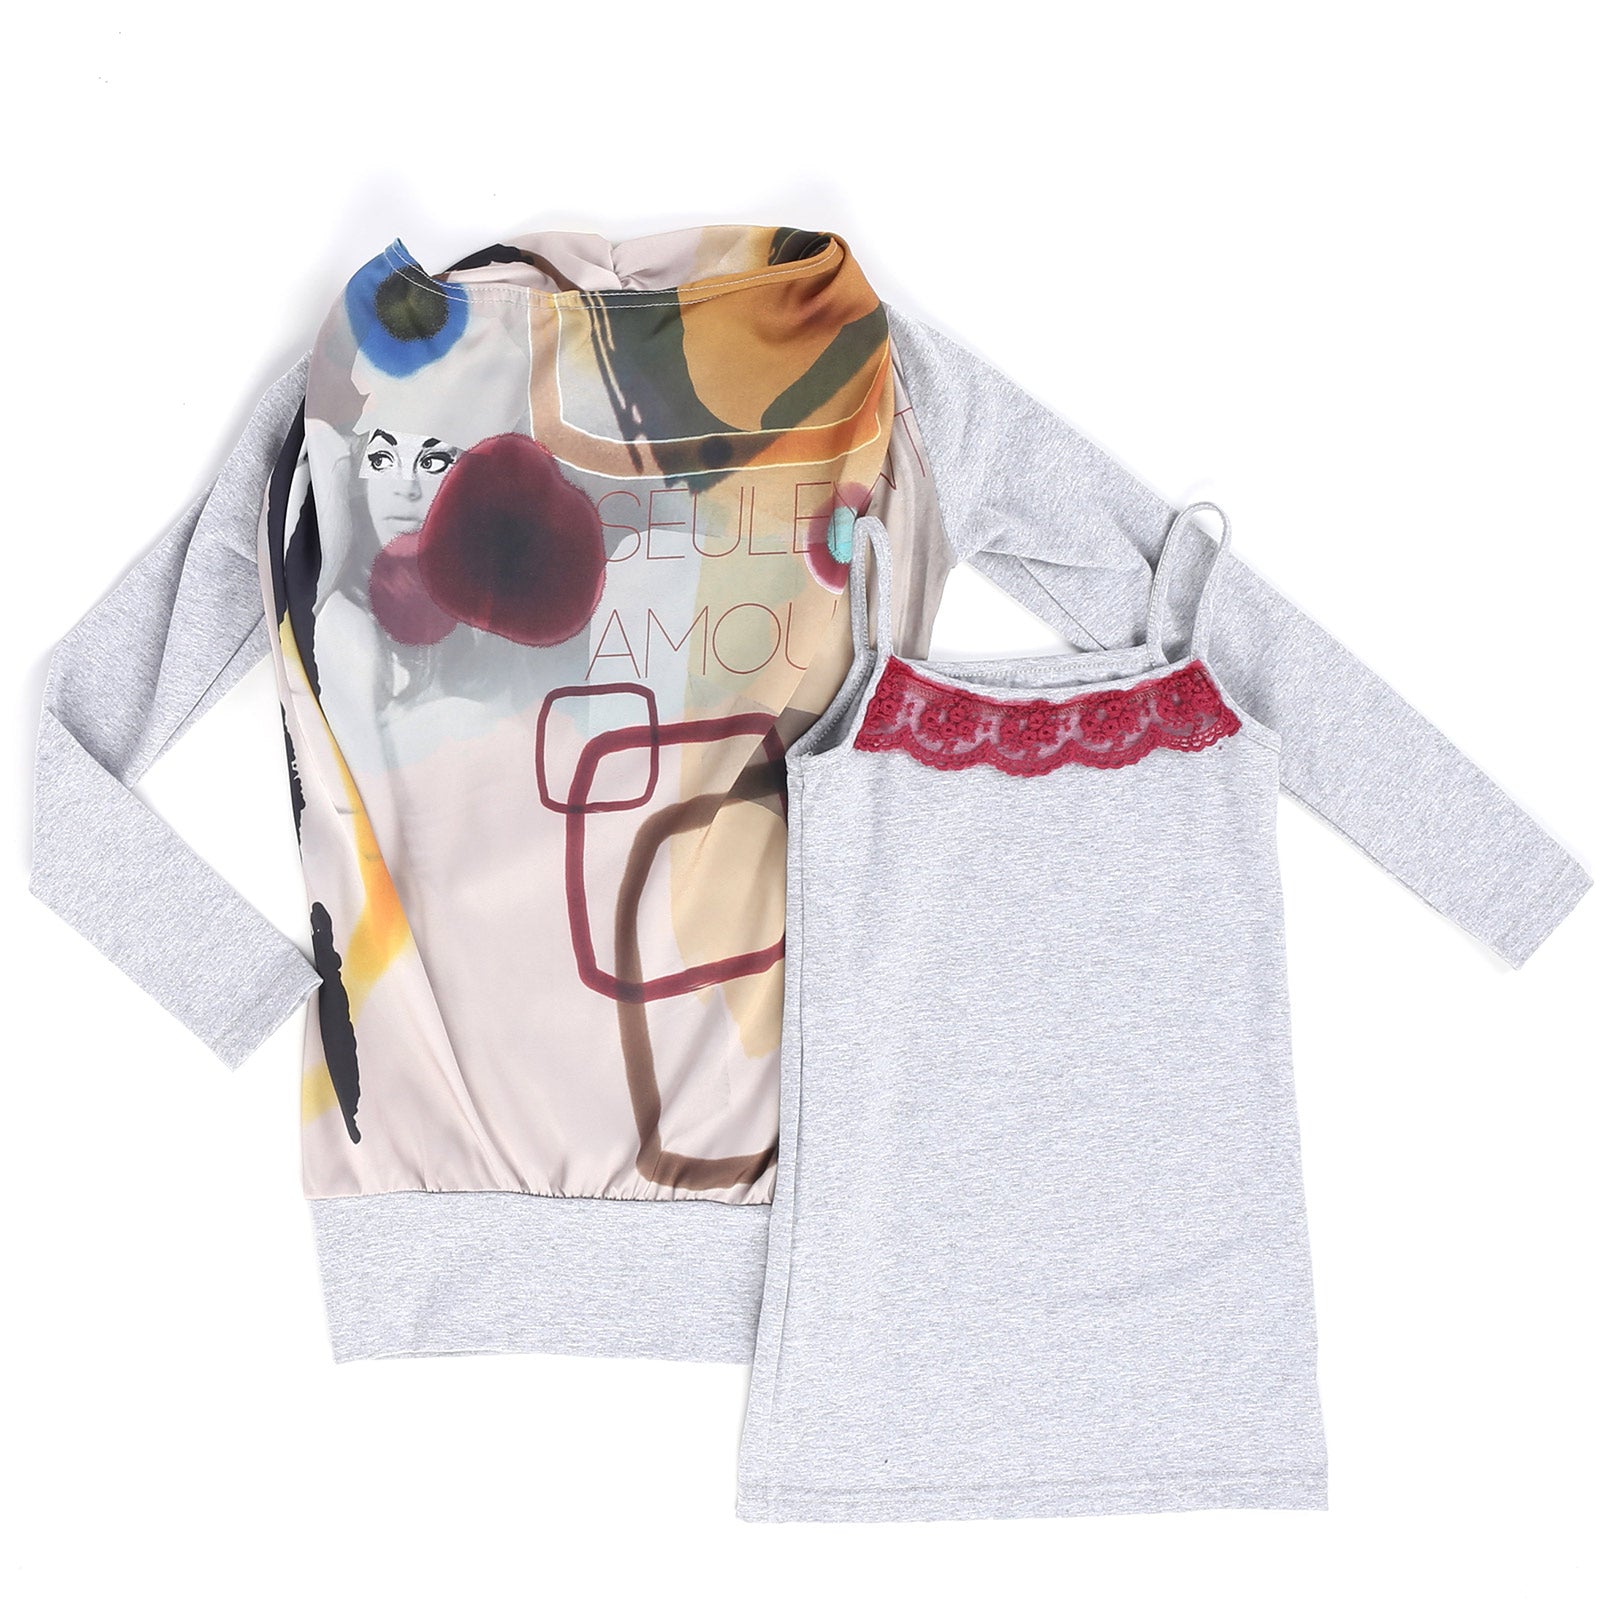 
  Maxi t-shirt from the girls' clothing line Fracomina Mini, with rich print
  on the front and ...